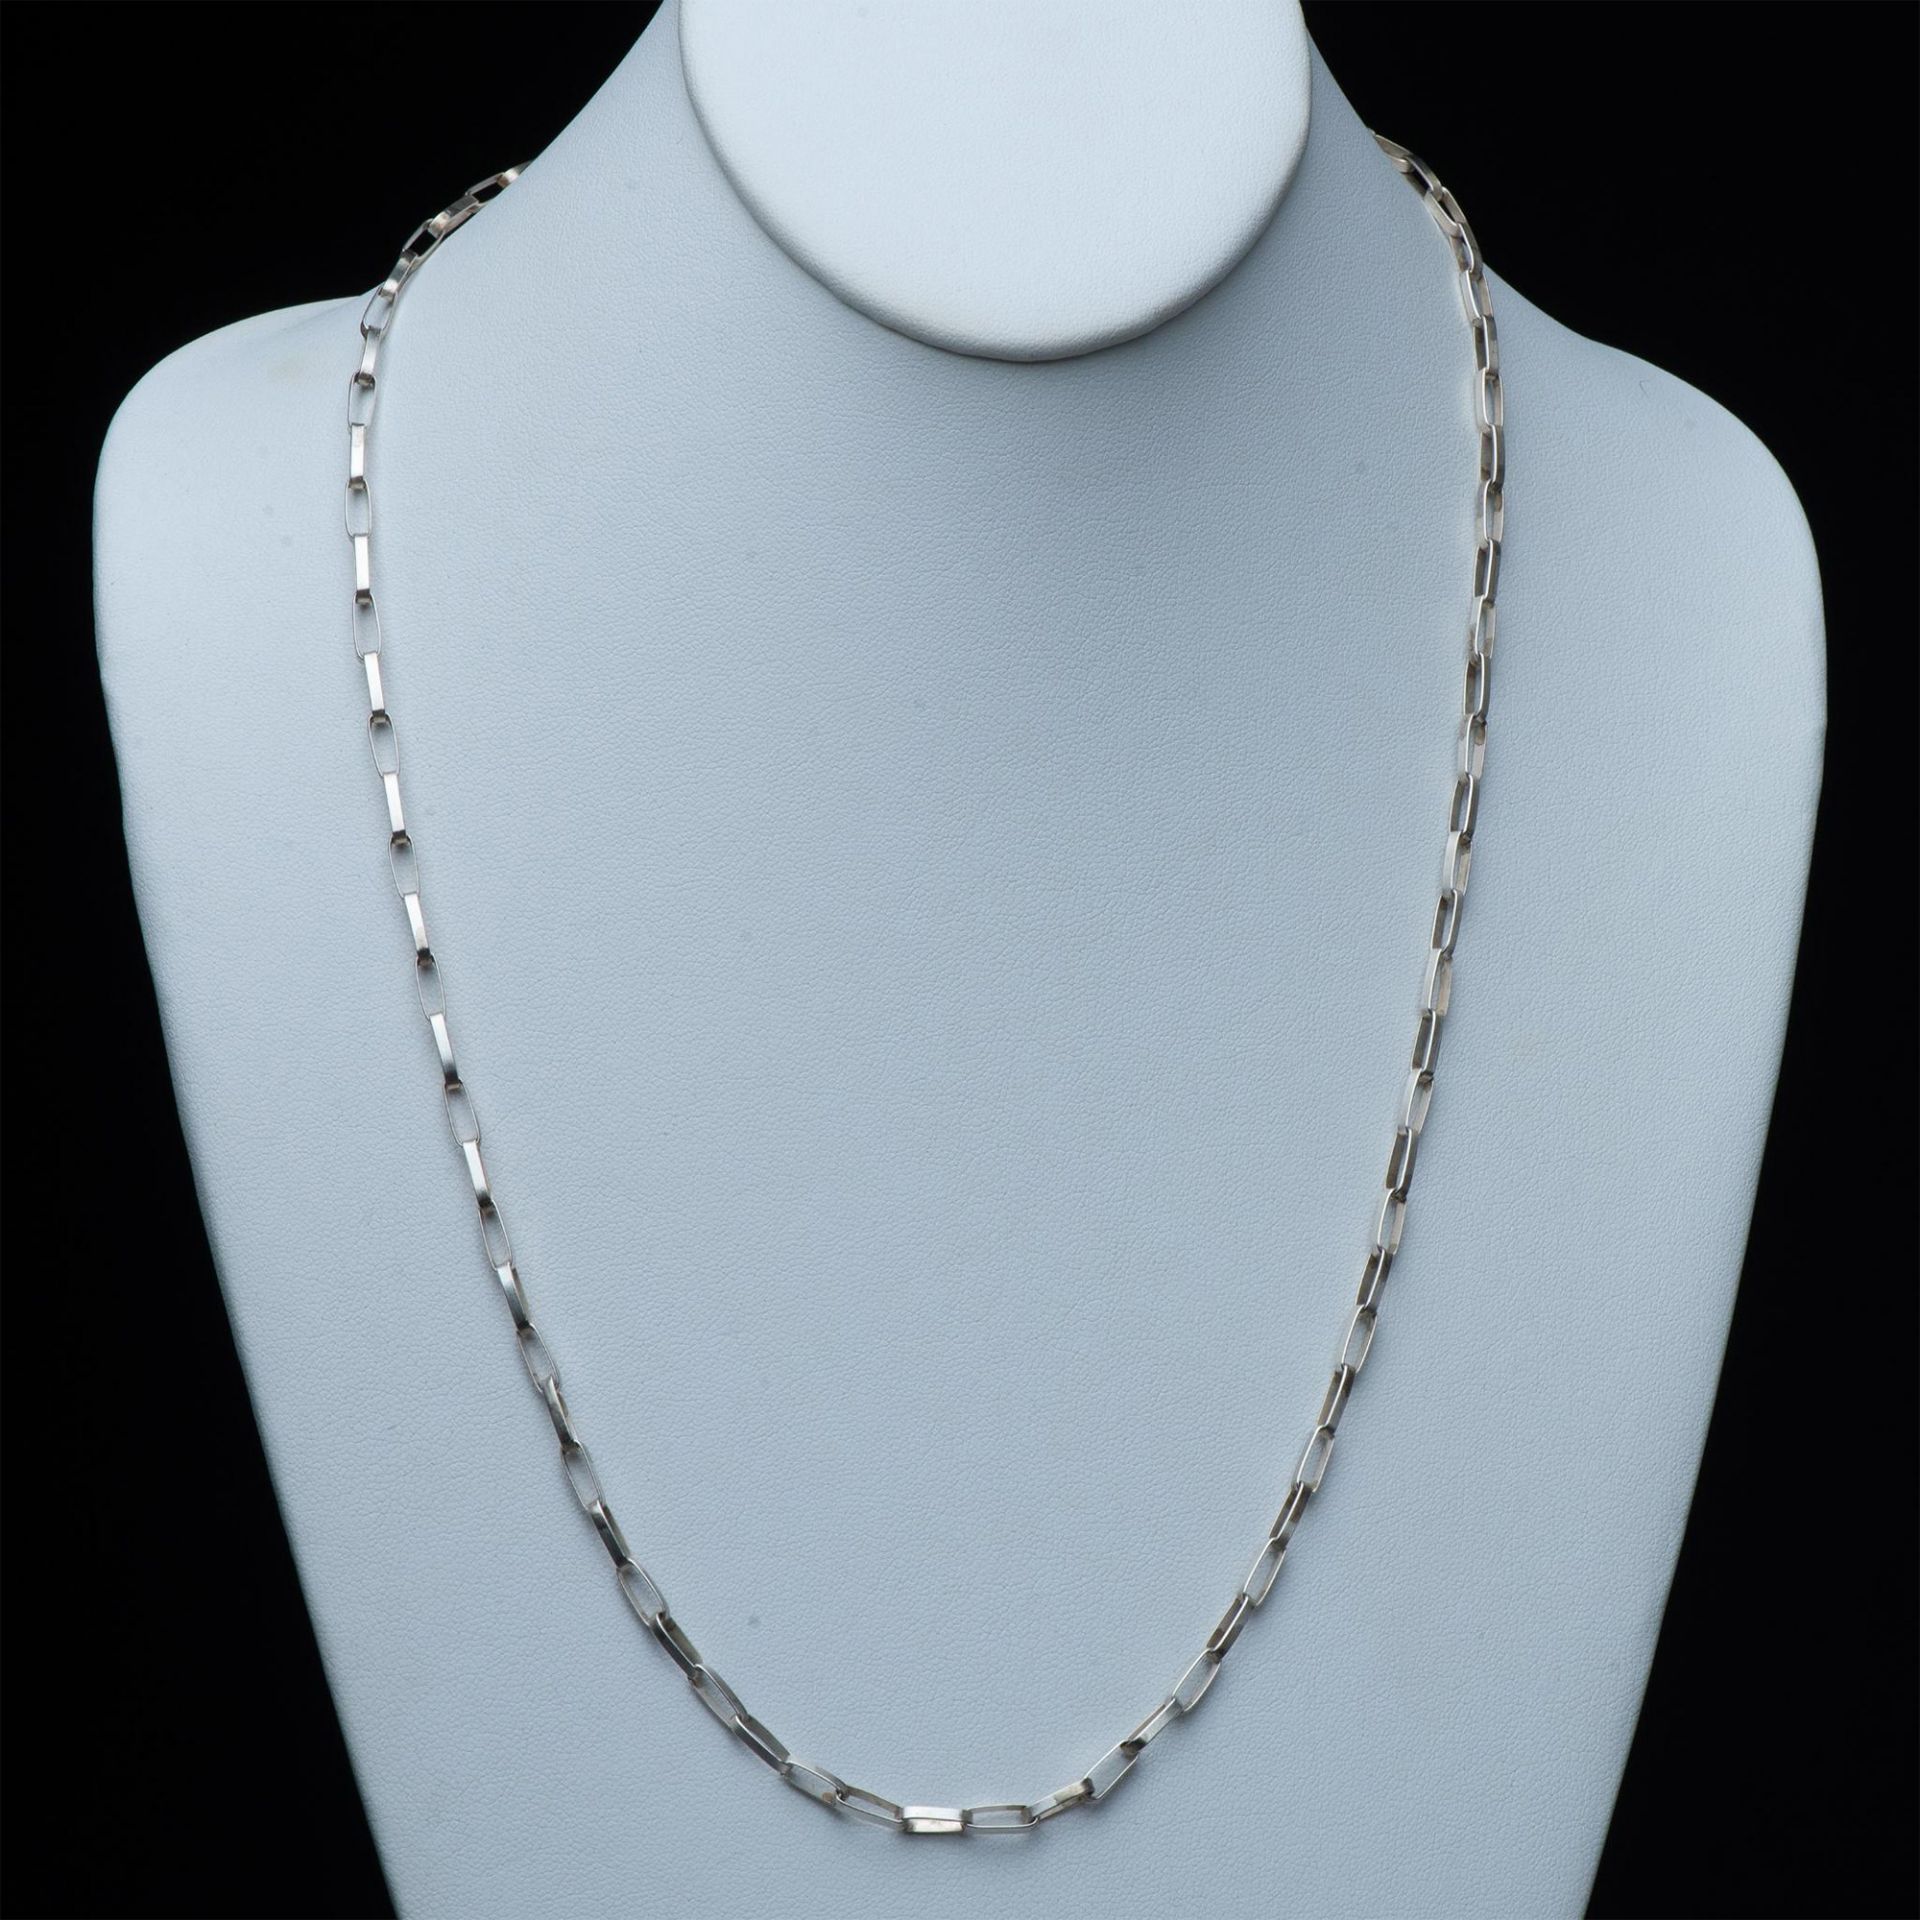 5pc Silver Tone Necklaces and Bracelet - Image 9 of 10